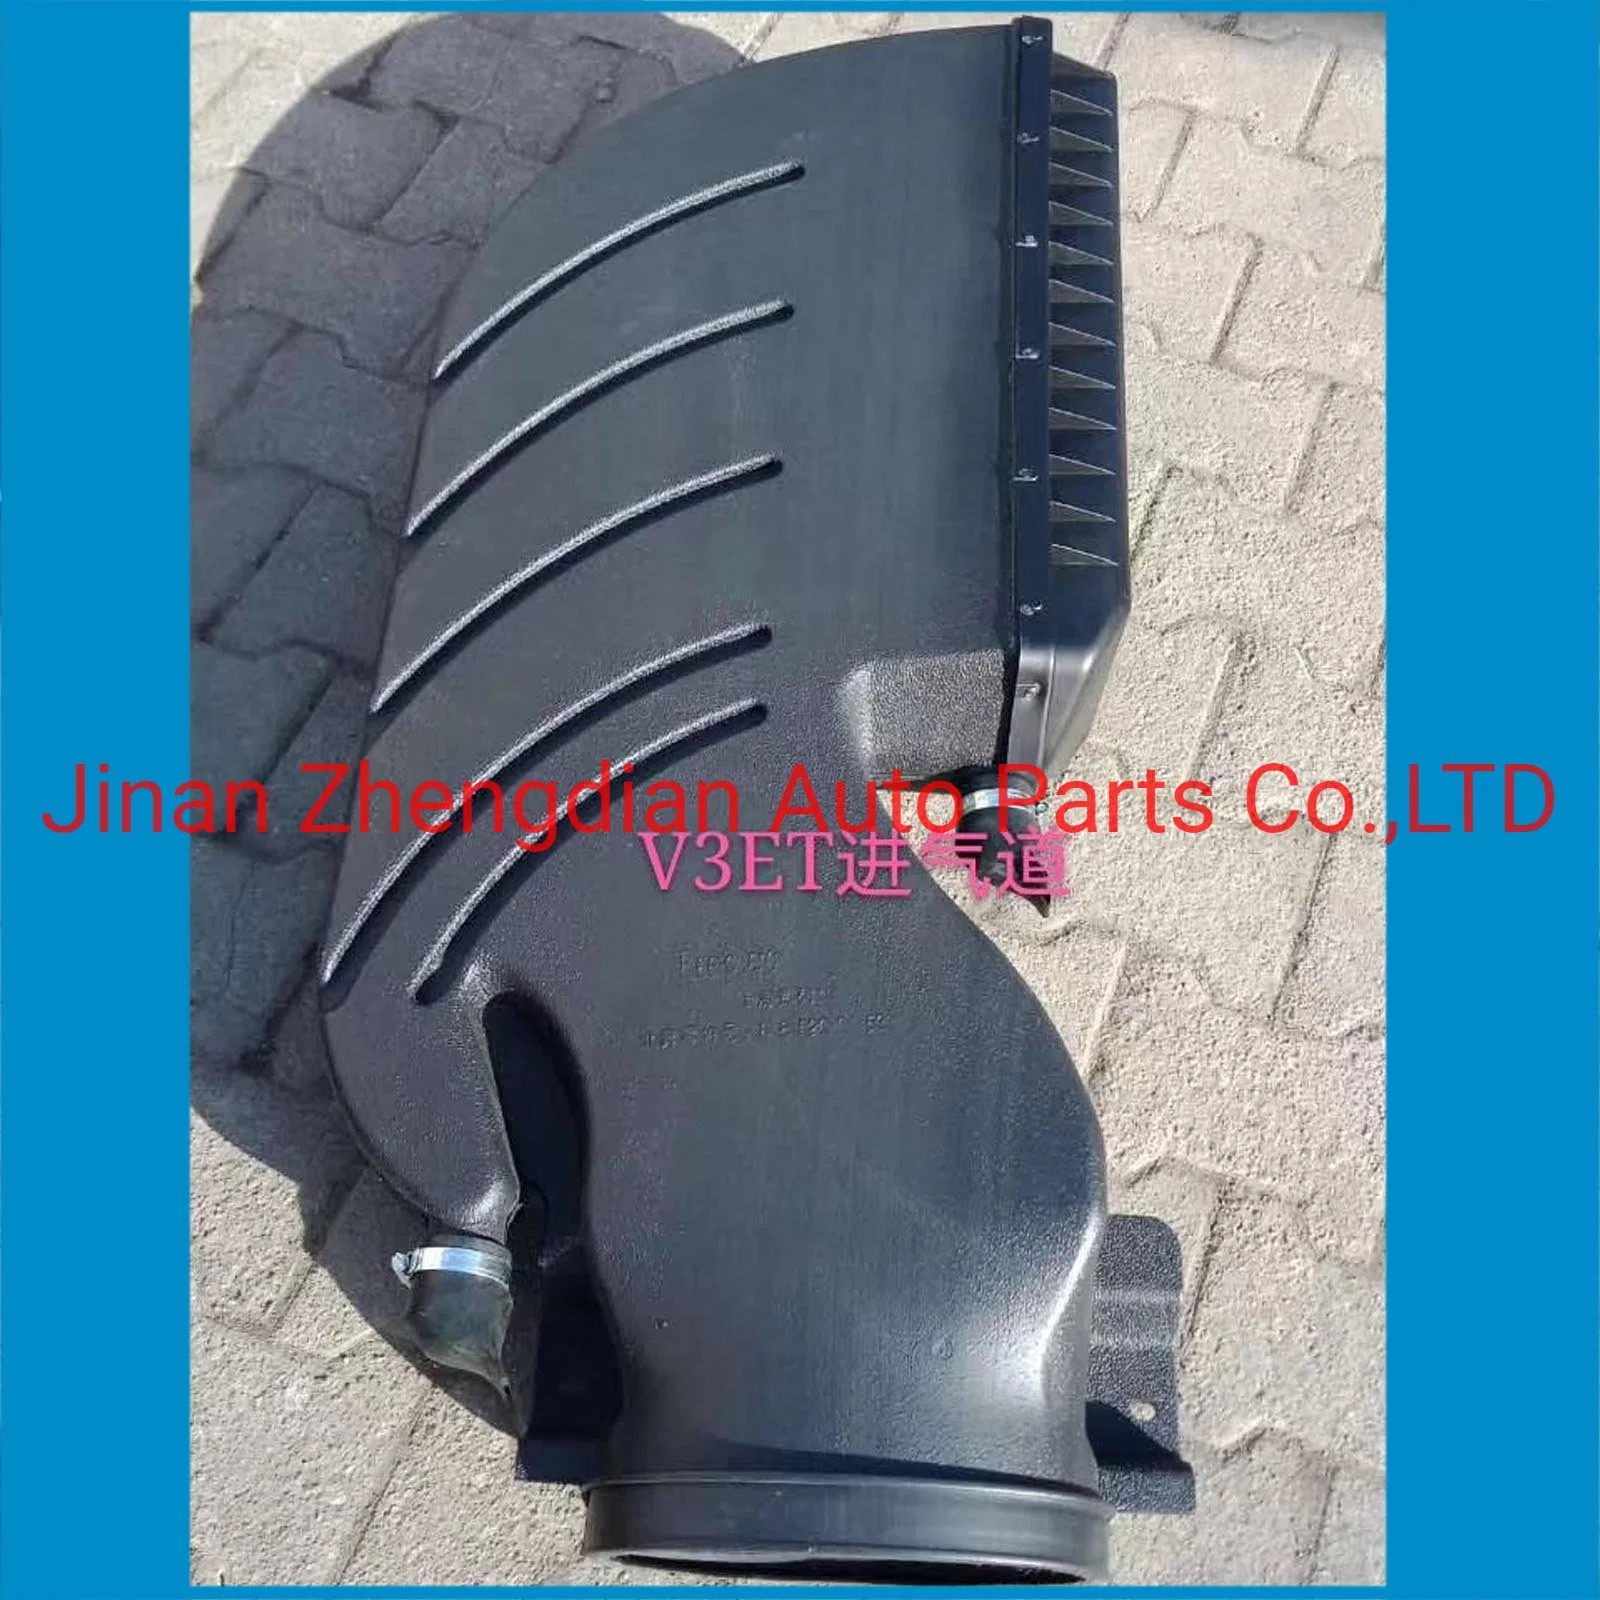 8135200753 Auto Air Inlet Air Vent Air Intake Duct for Beiben North Benz V3et Truck Spare Parts Sinotruk HOWO Shacman FAW Foton Auman Sitrak Steyr Hongyan Camc